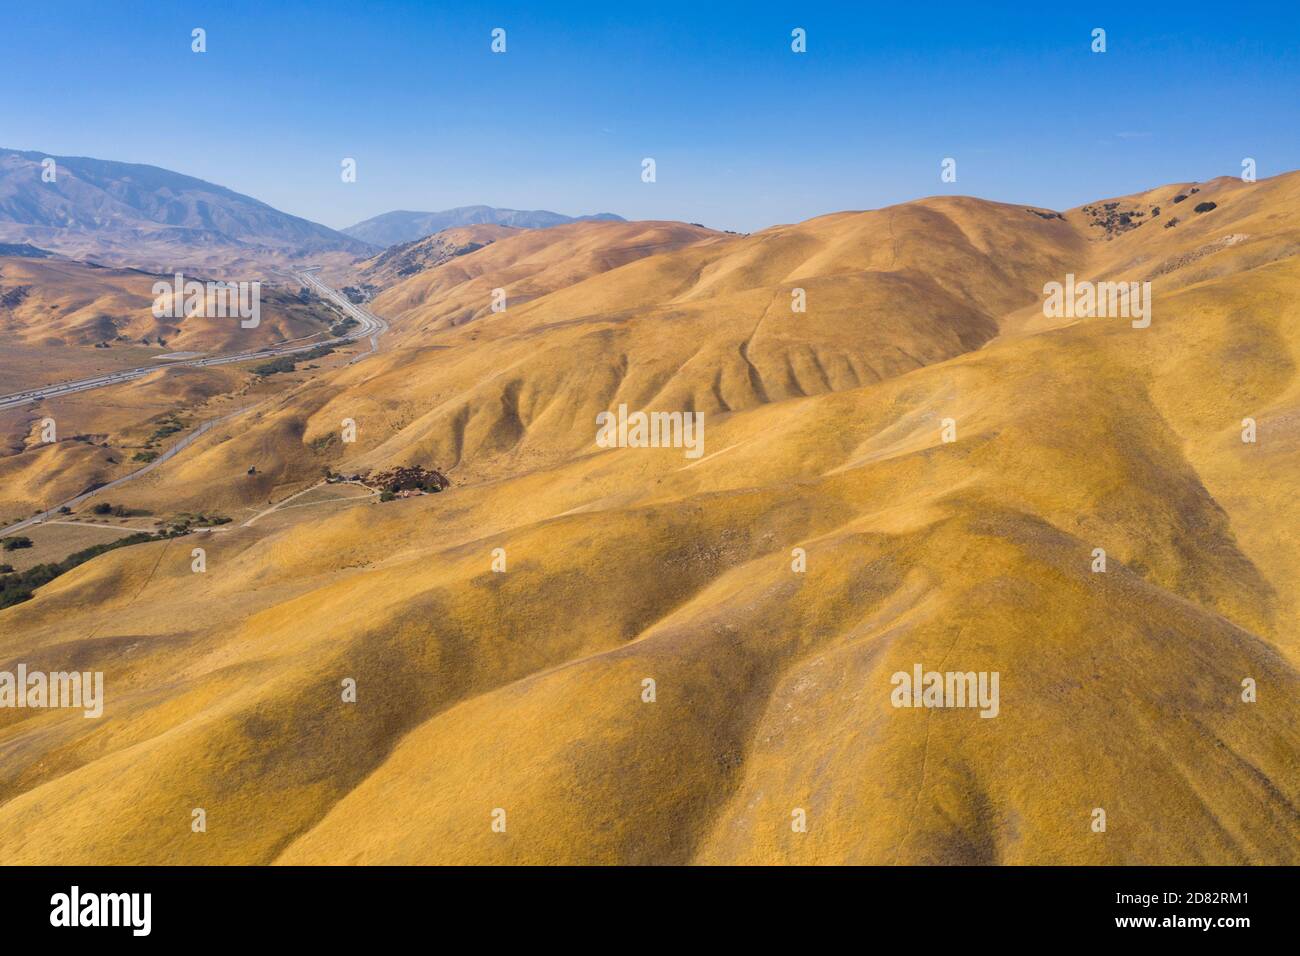 Aerial view of grassy hills along the San Andreas fault near Gorman, California Stock Photo